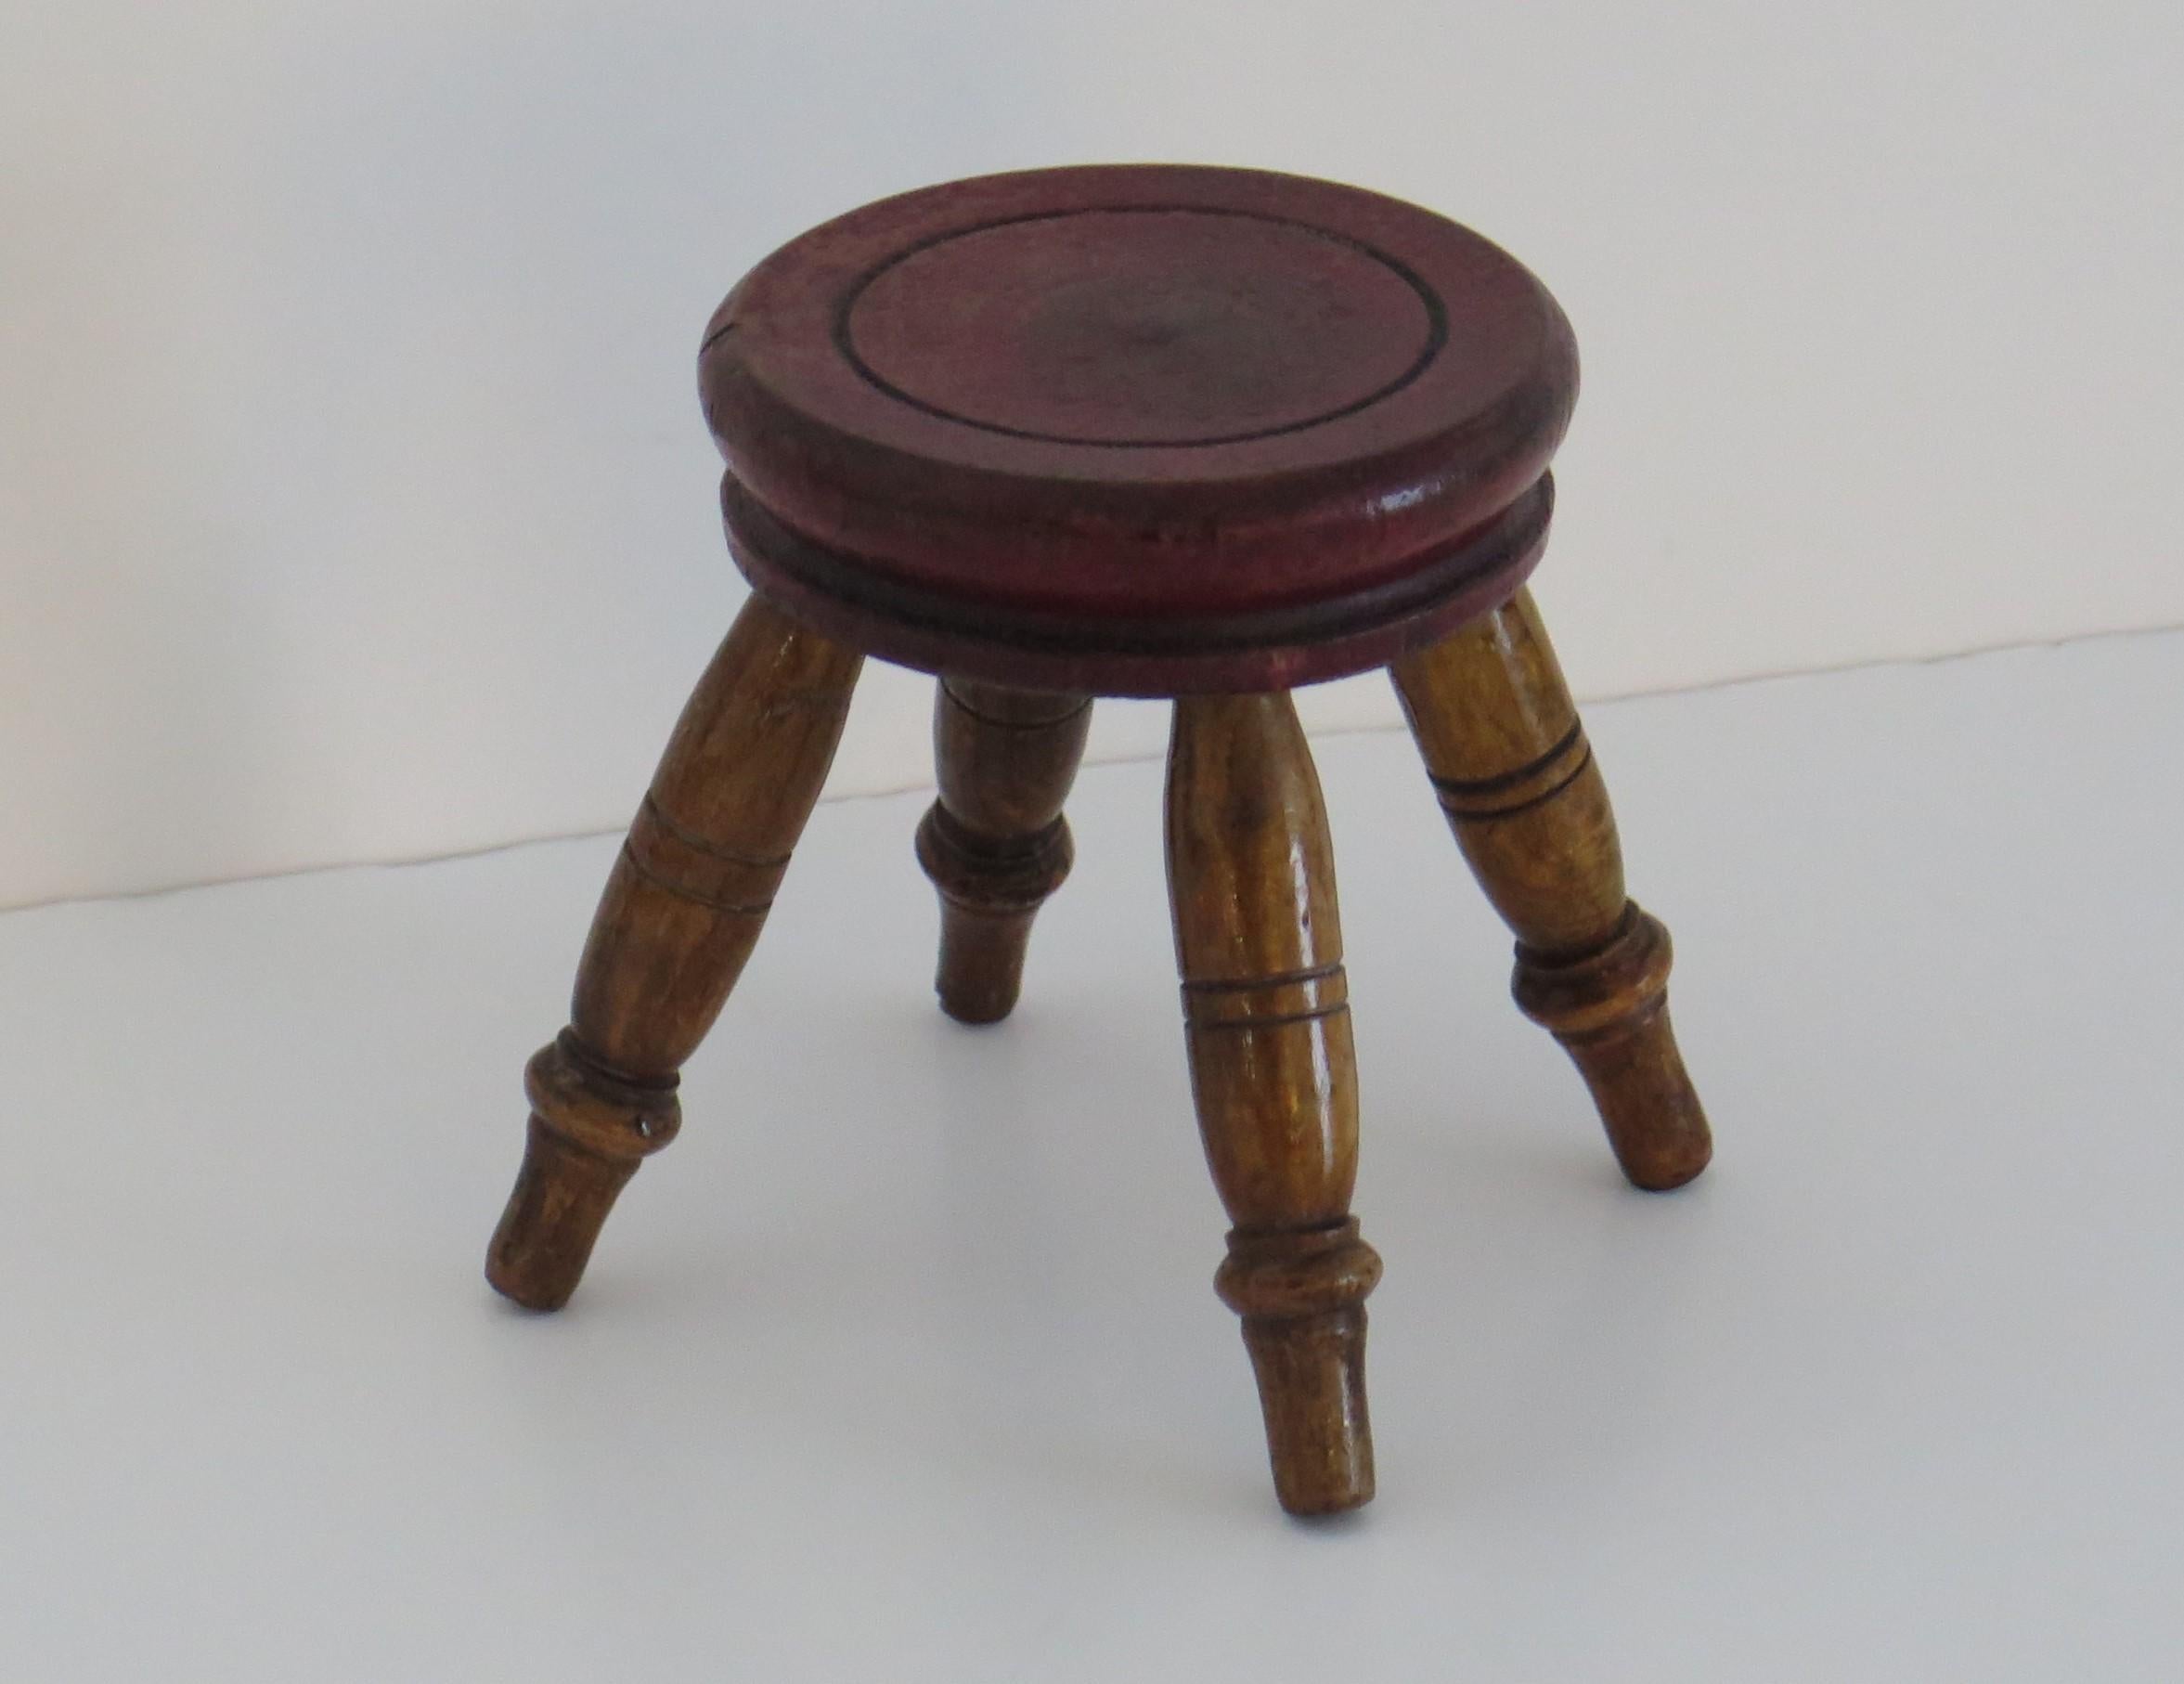 This is a rare example of a small Candle Stand or very small (miniature) stool, Circa 1850.

Small stools or candle stand of these very small proportions are rare.

The thick circular top is well hand turned and hand painted with a red colour.